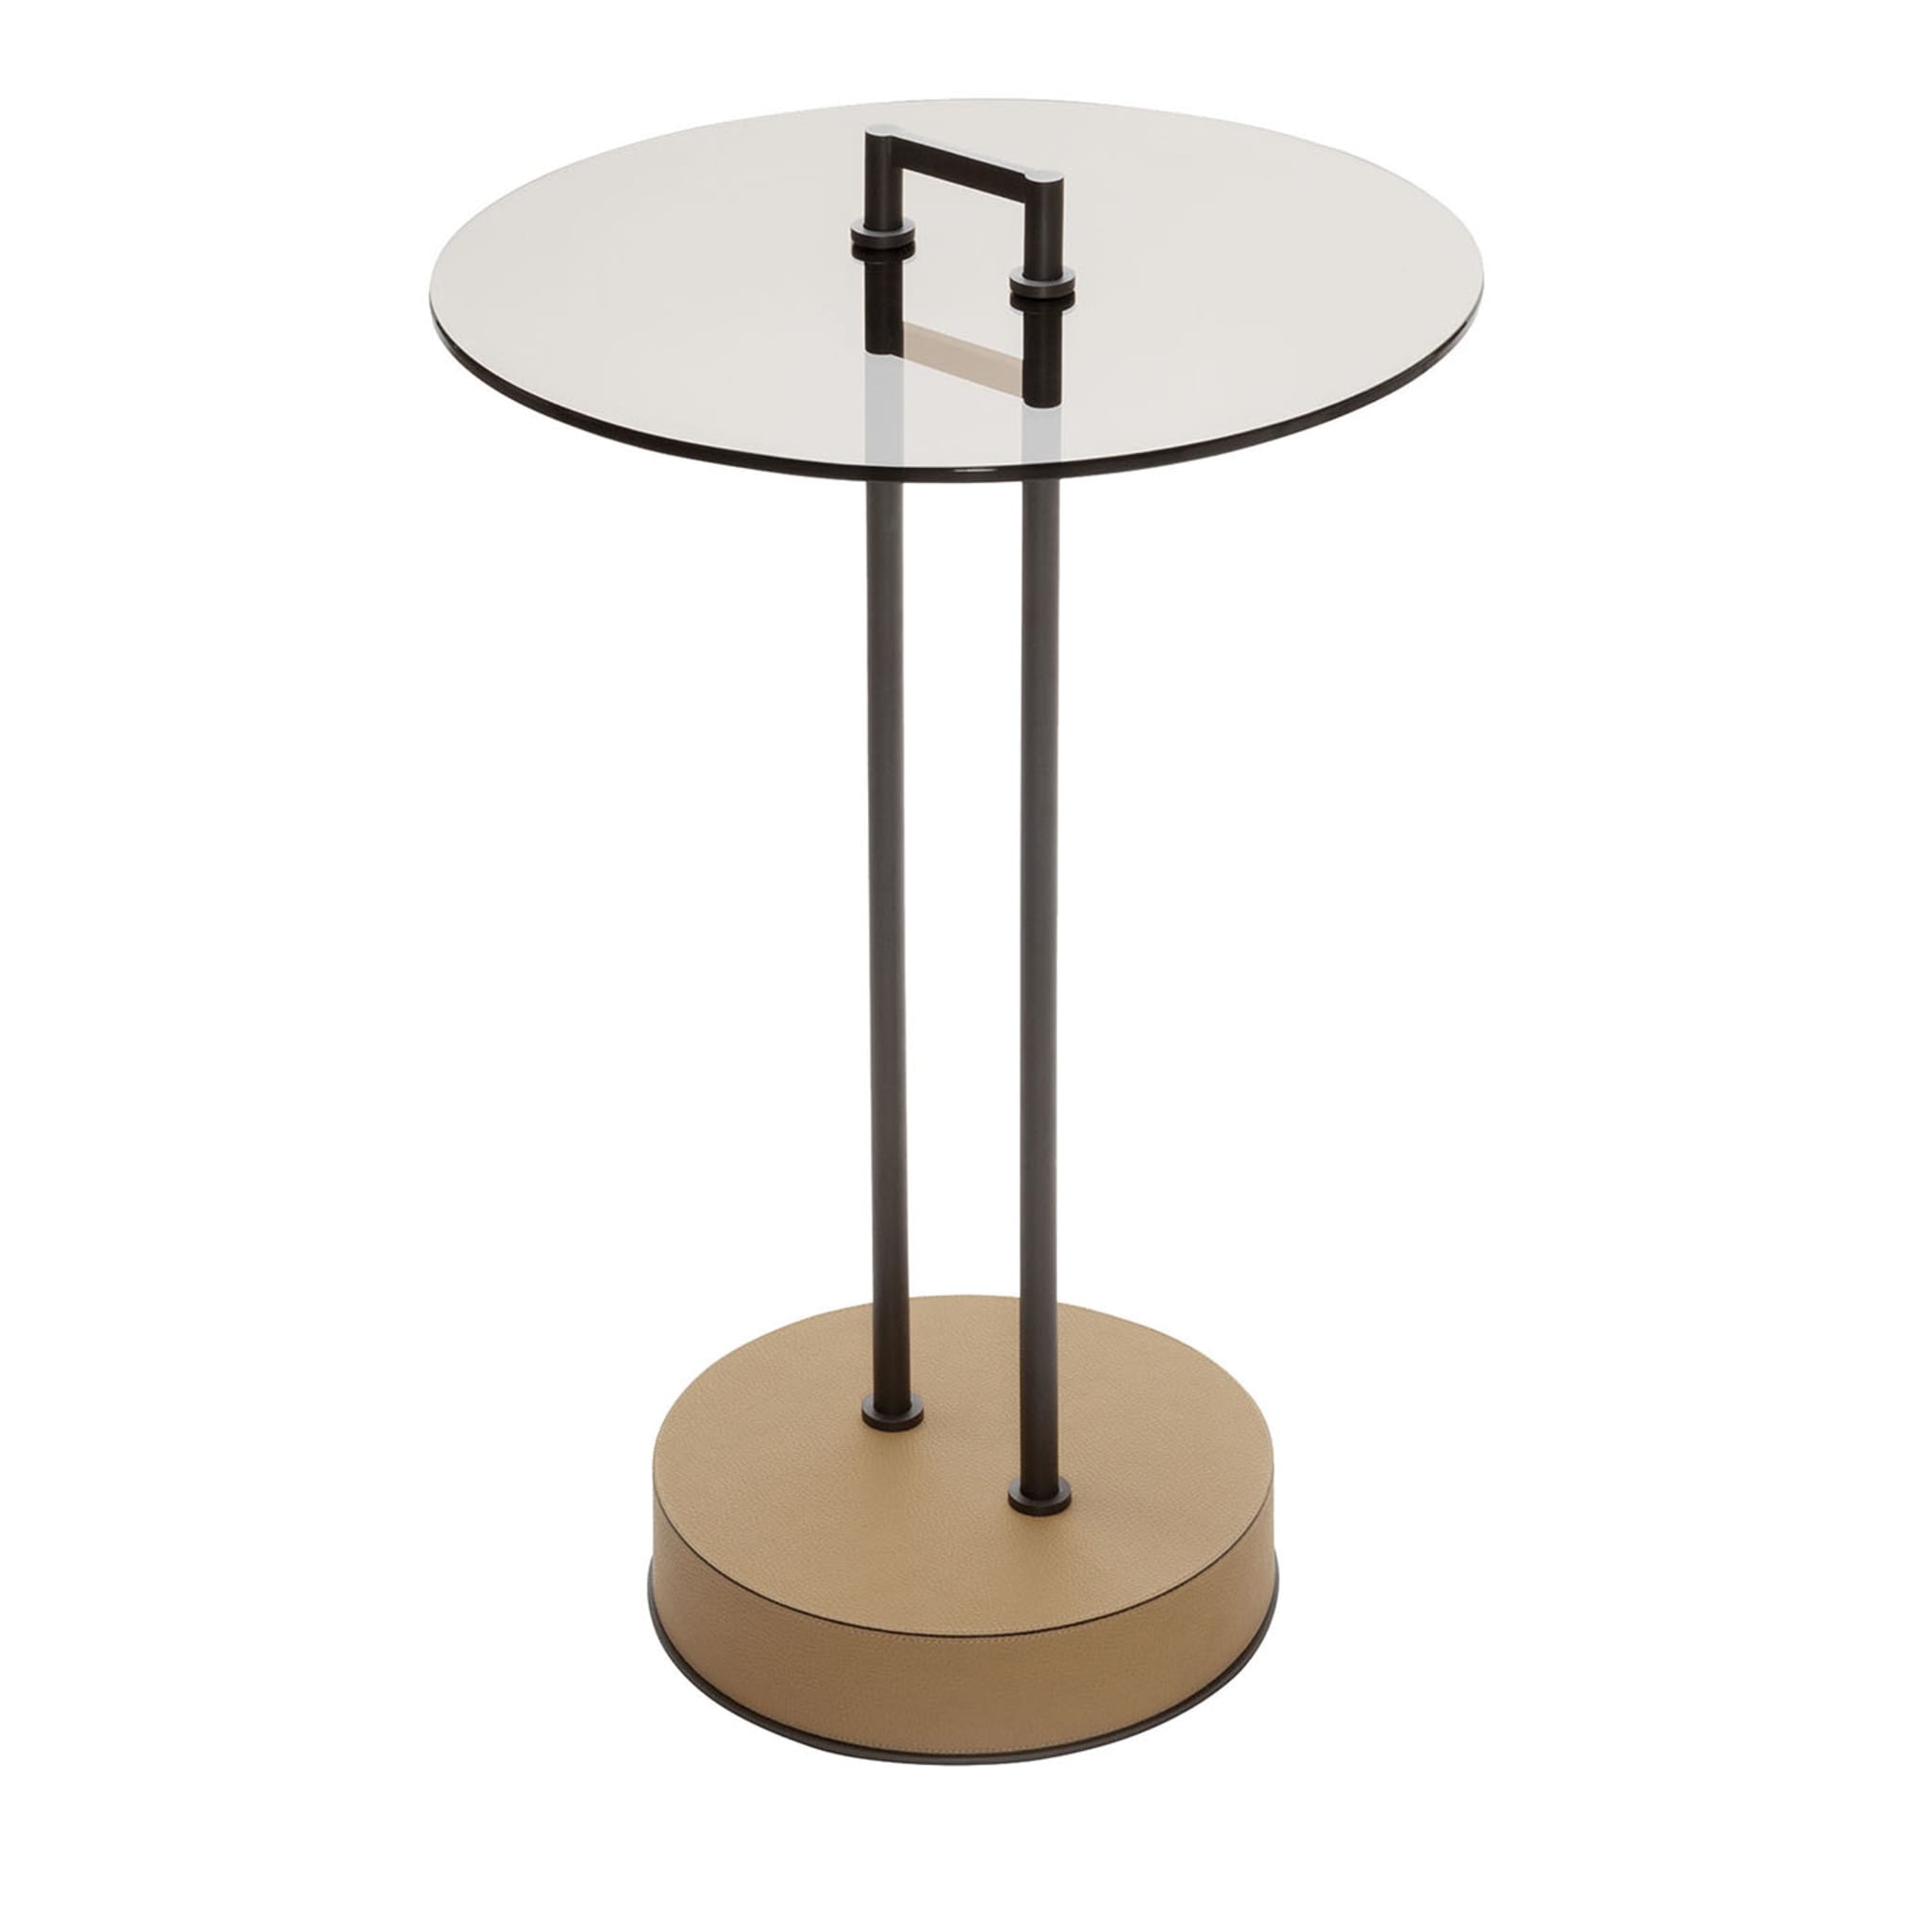 Urbino Marble Occasional Table #6 - Main view